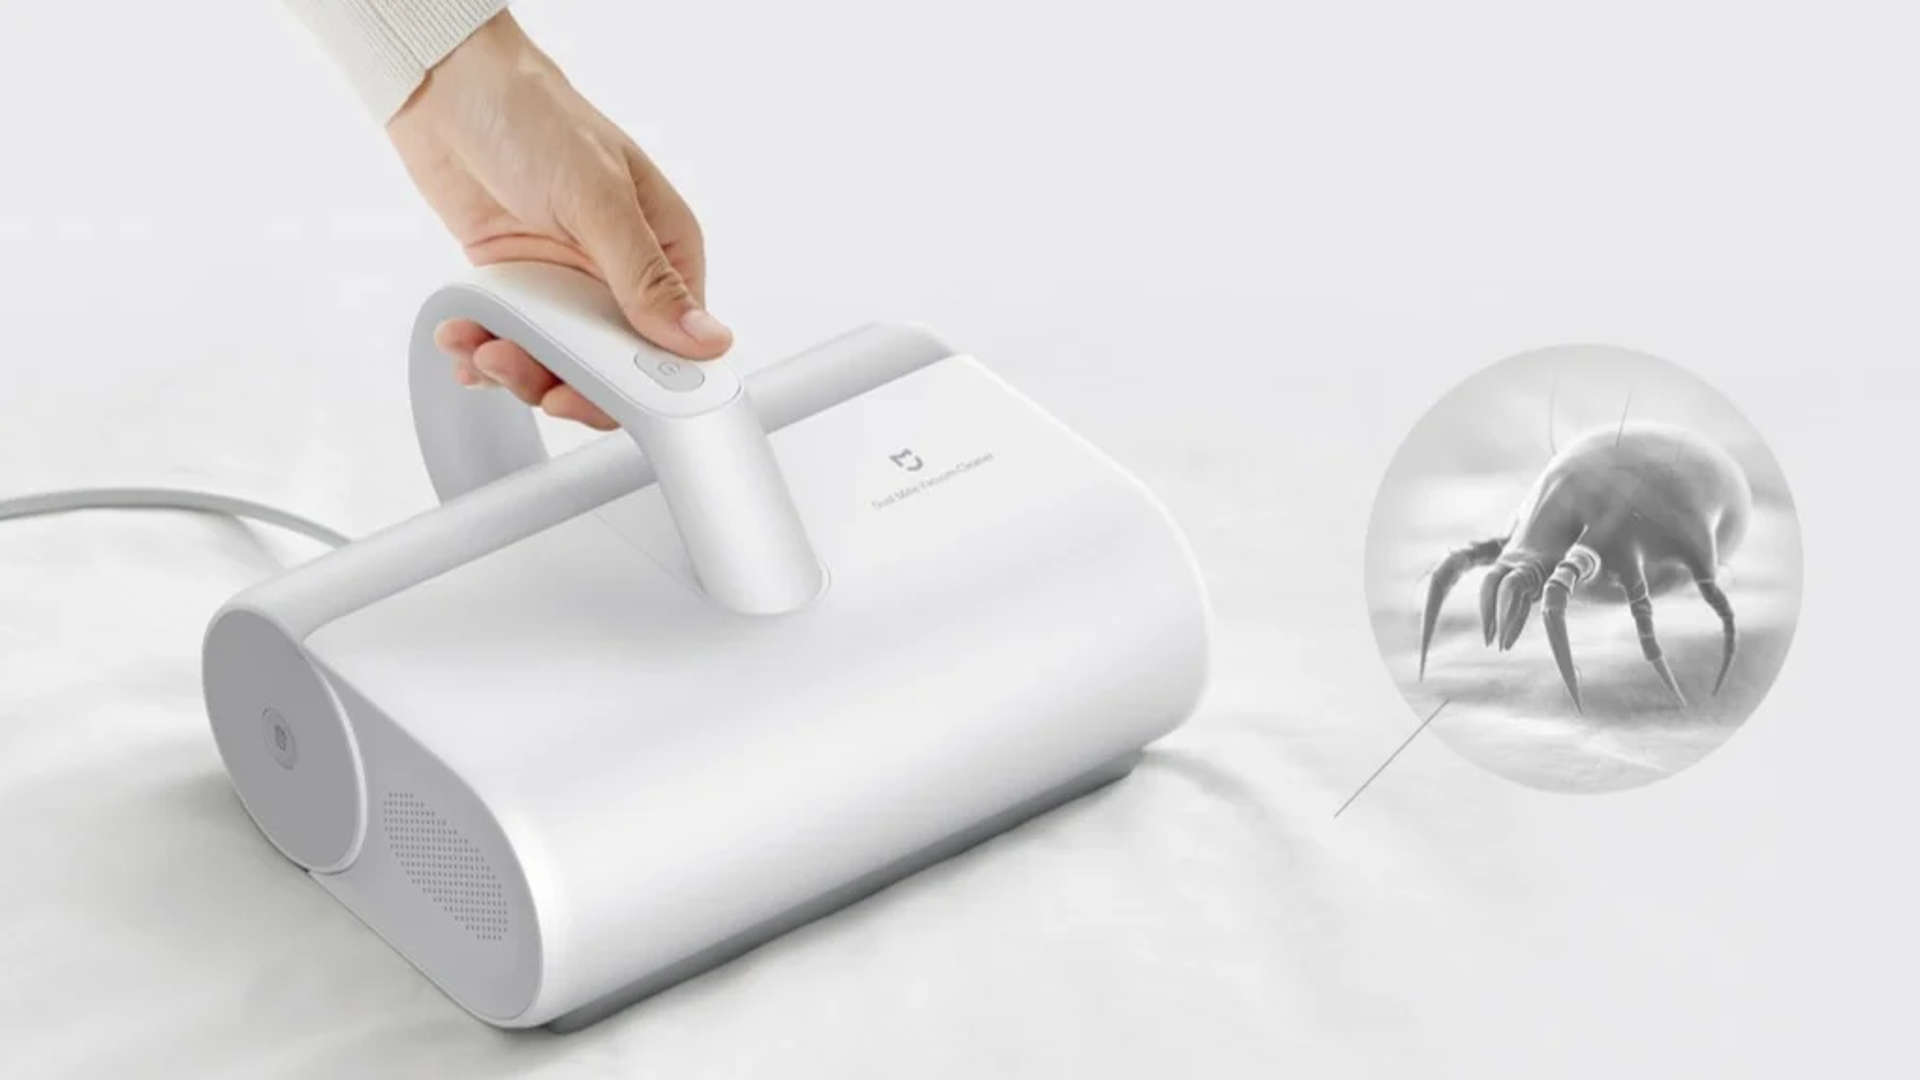 Cleaner mjcmy01dy. Xiaomi Mijia Dust Mite Vacuum Cleaner mjcmy01dy. Xiaomi Mijia Dust Mite Vacuum Cleaner White (белый) mjcmy01dy. Пылесос Xiaomi Dust Mite Vacuum Cleaner (mjcmy01dy). Xiaomi Mijia Dust Mite Vacuum Cleaner White.